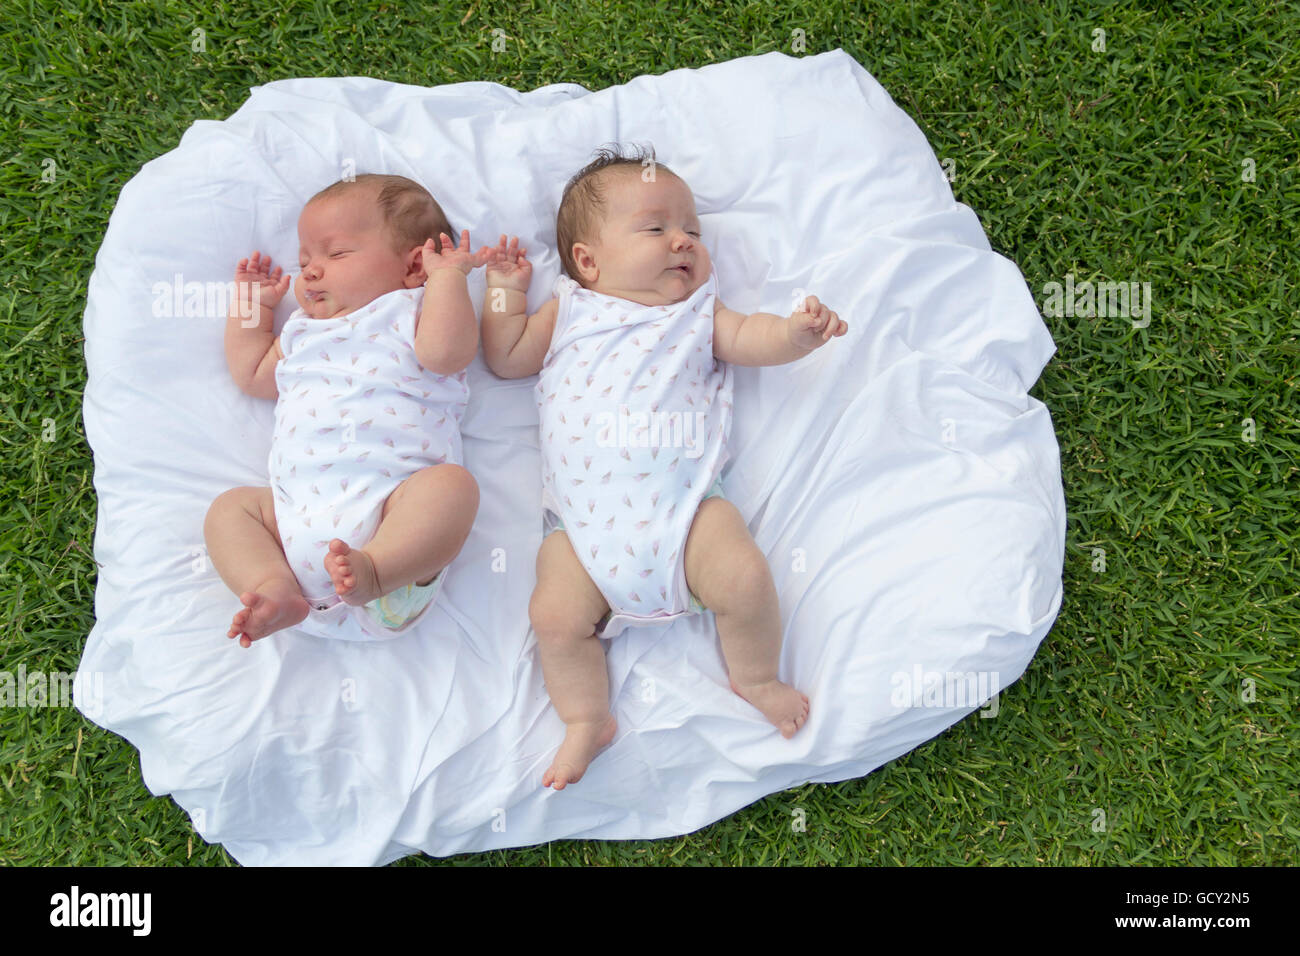 twin babies on the grass in the park Stock Photo